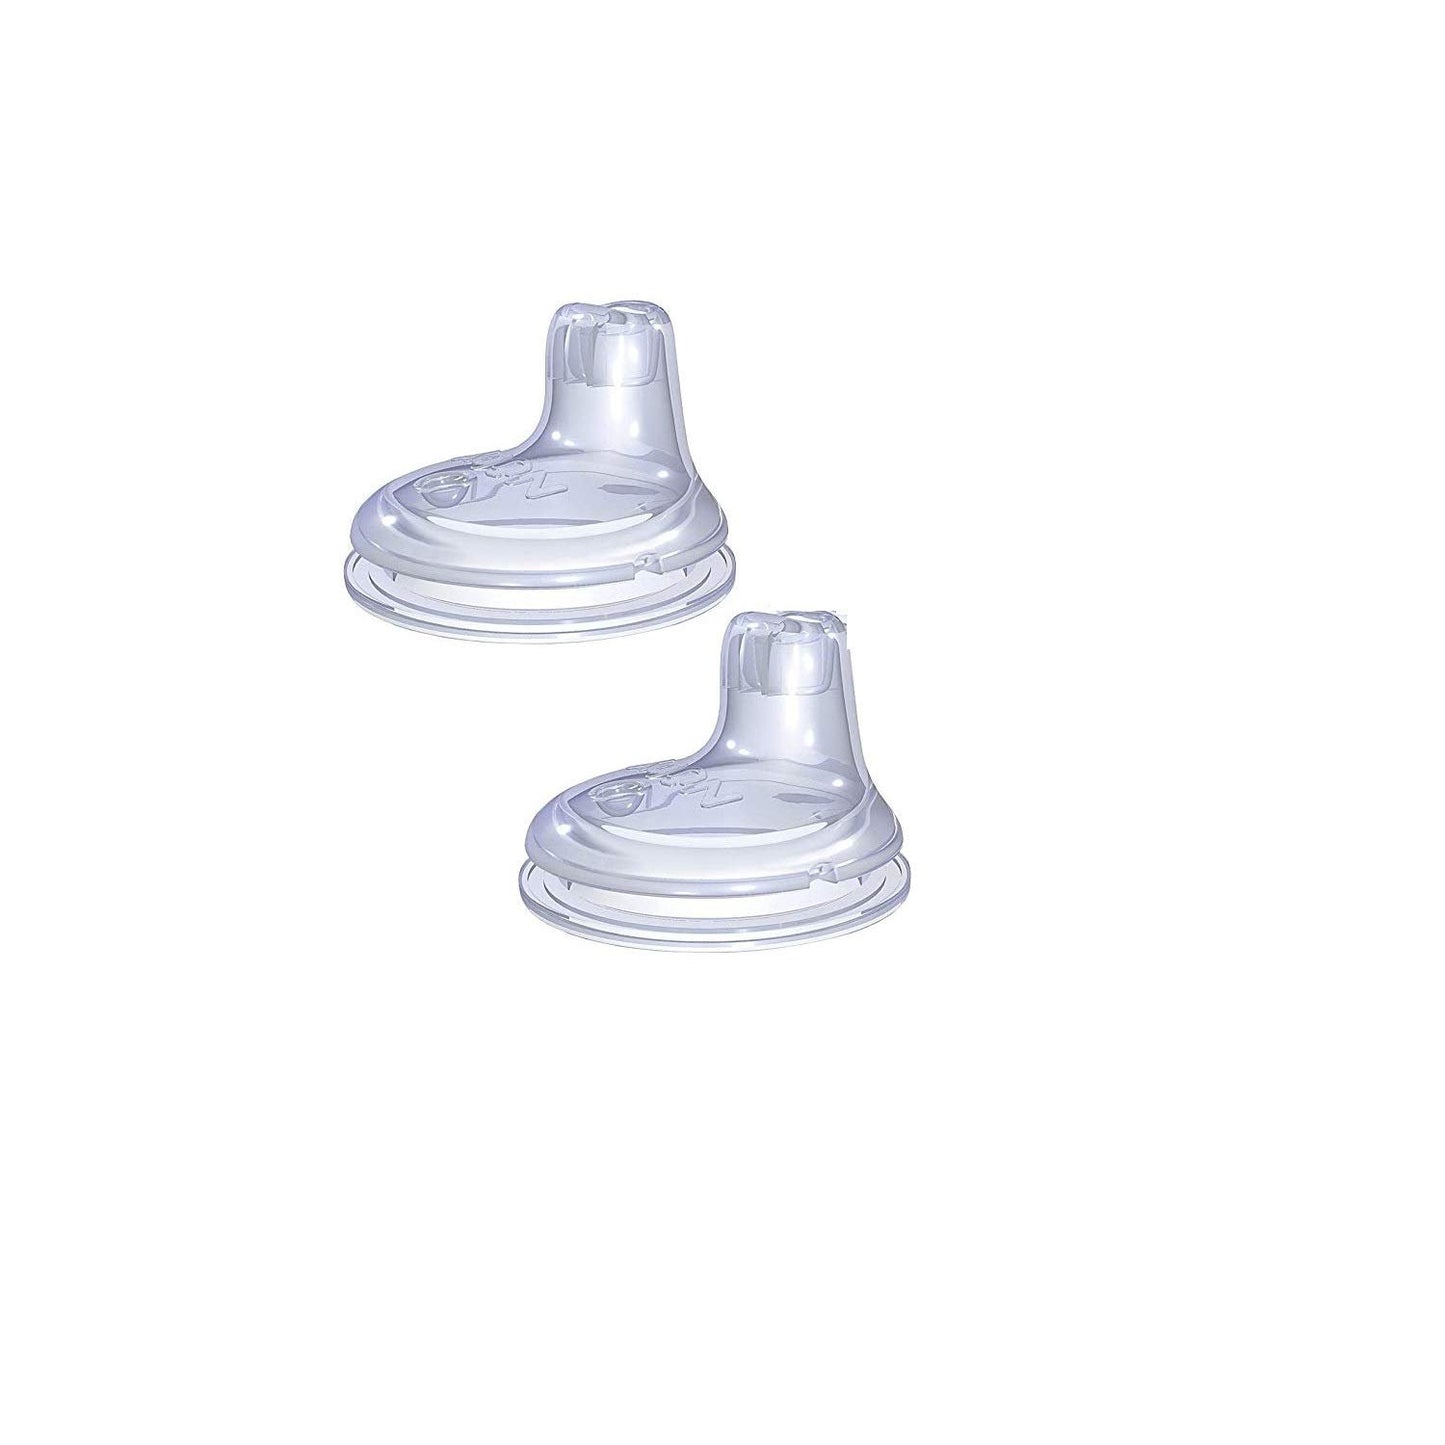 Nuby Sippy Gripper Cup Replacement Spouts - 6 Count